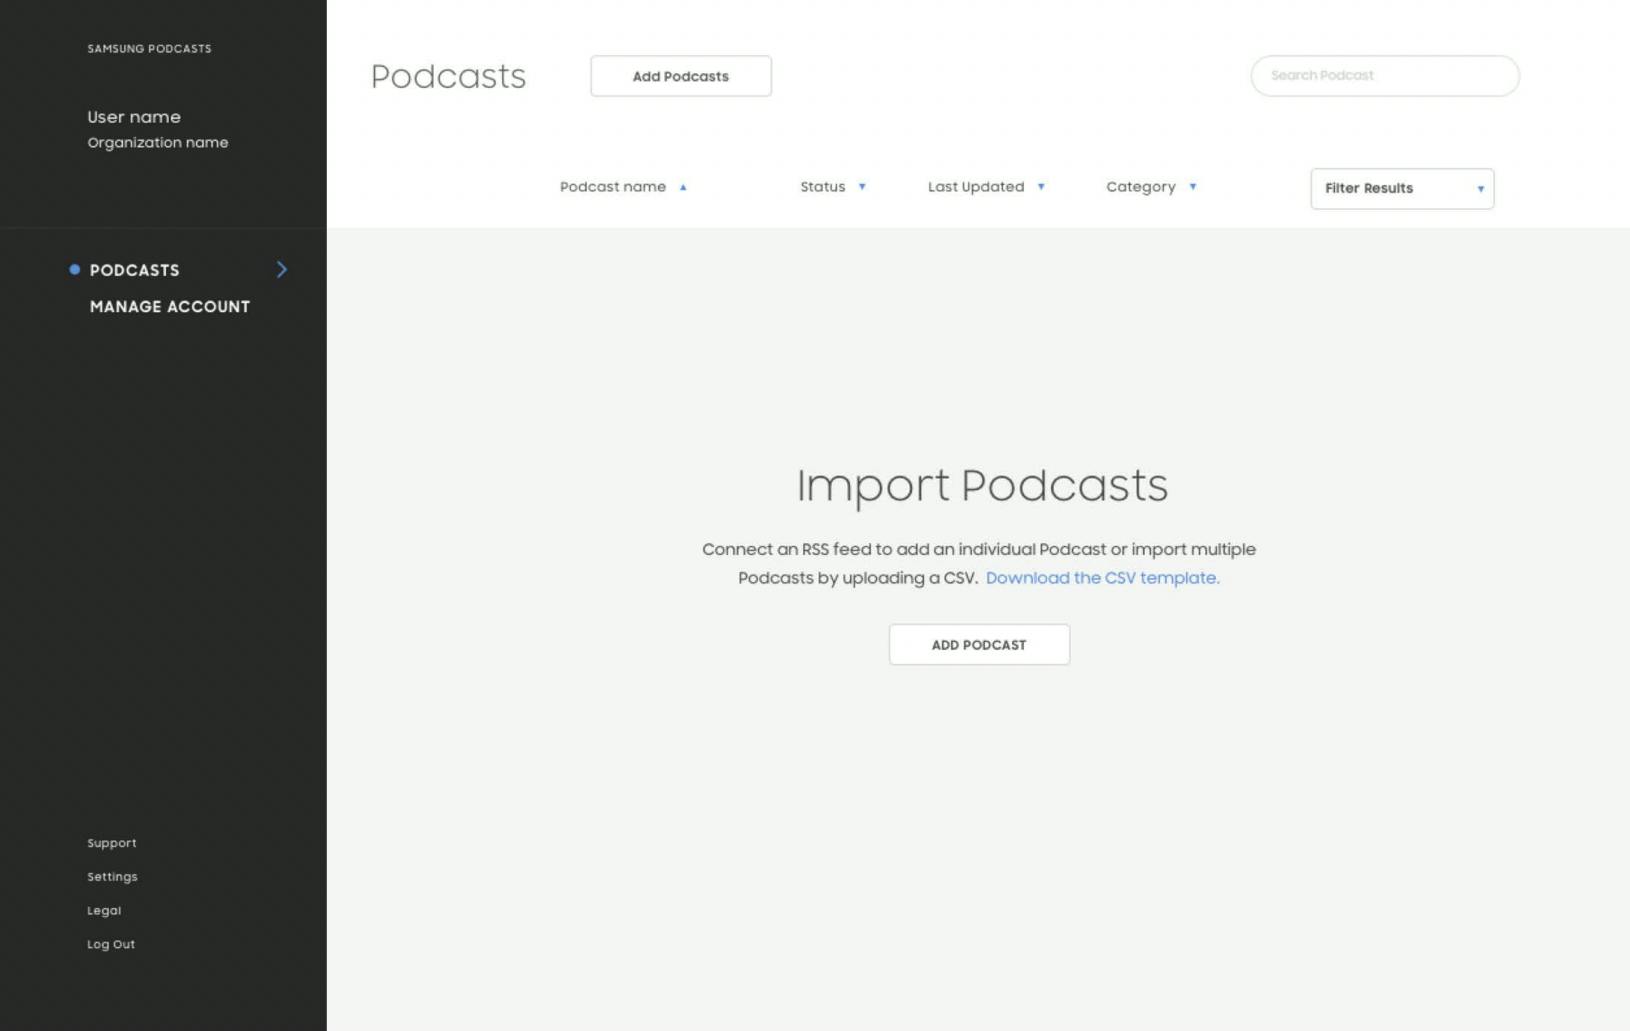 Import Podcasts page with Samsung Podcasts dashboard